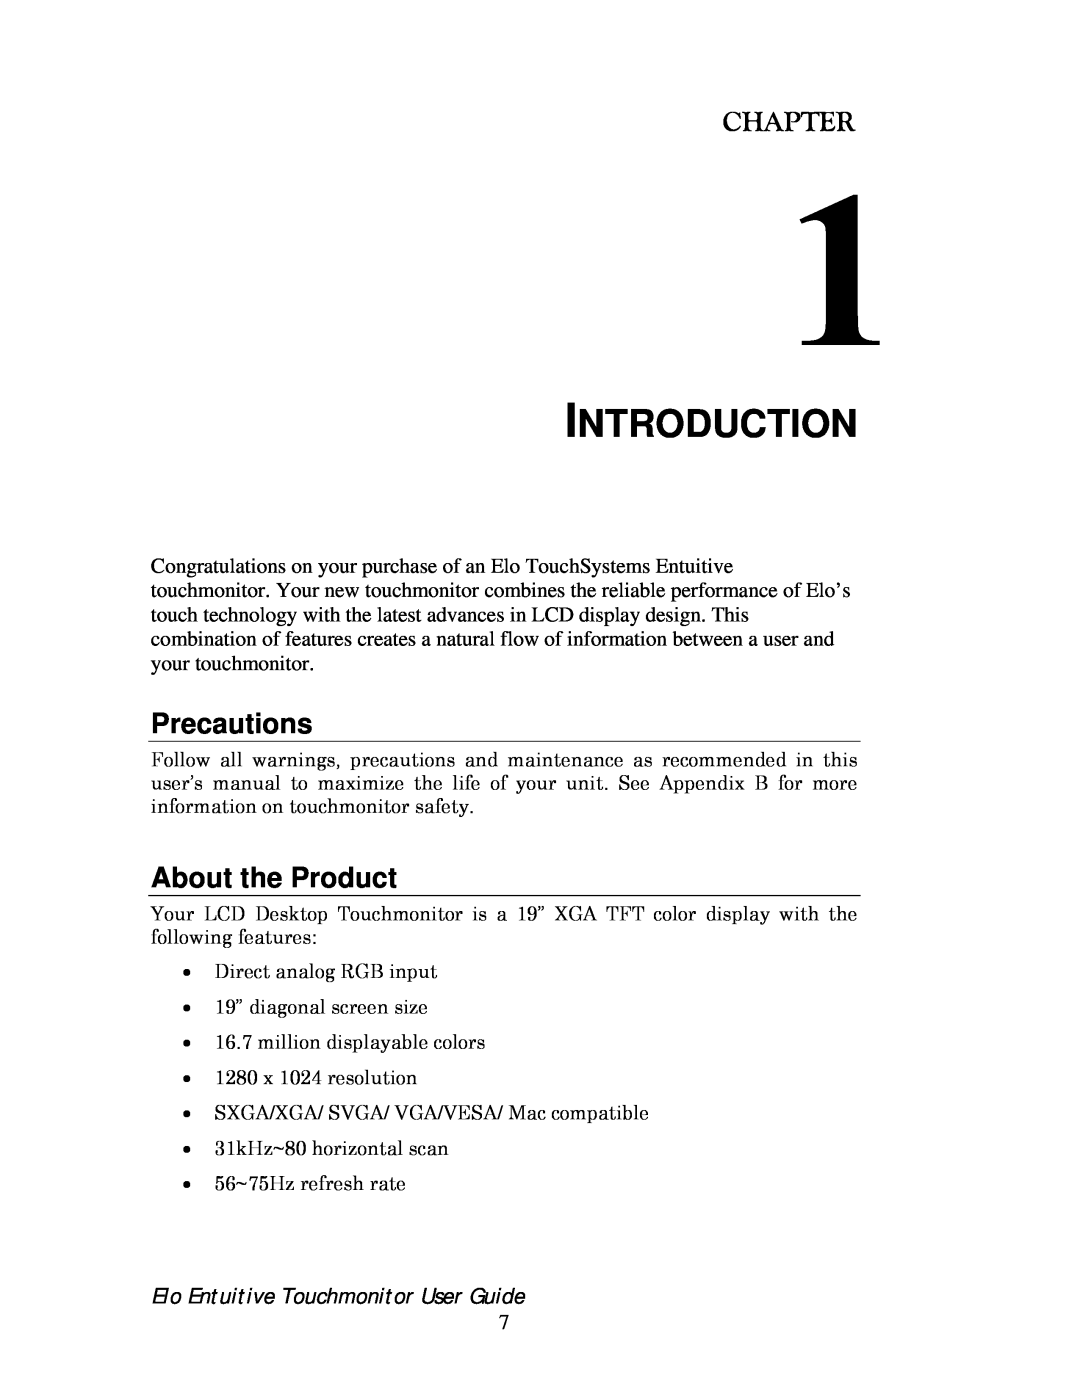 Elo TouchSystems 192XL-XXWA-1 Series manual Introduction, Chapter, Precautions, About the Product 